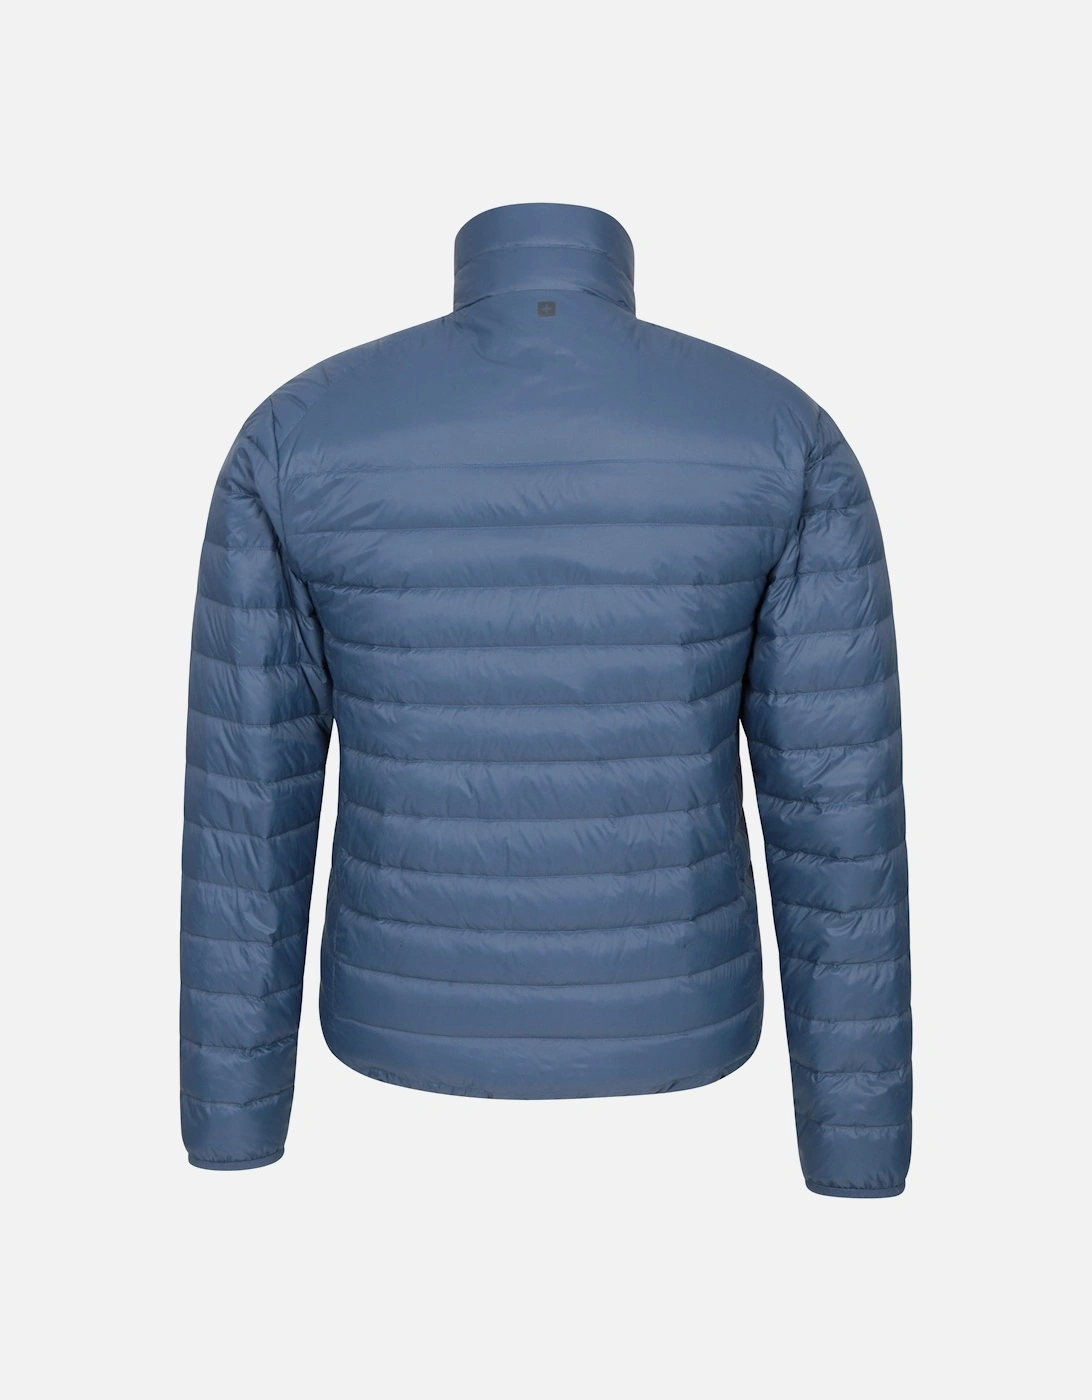 Mens Featherweight Down Jacket